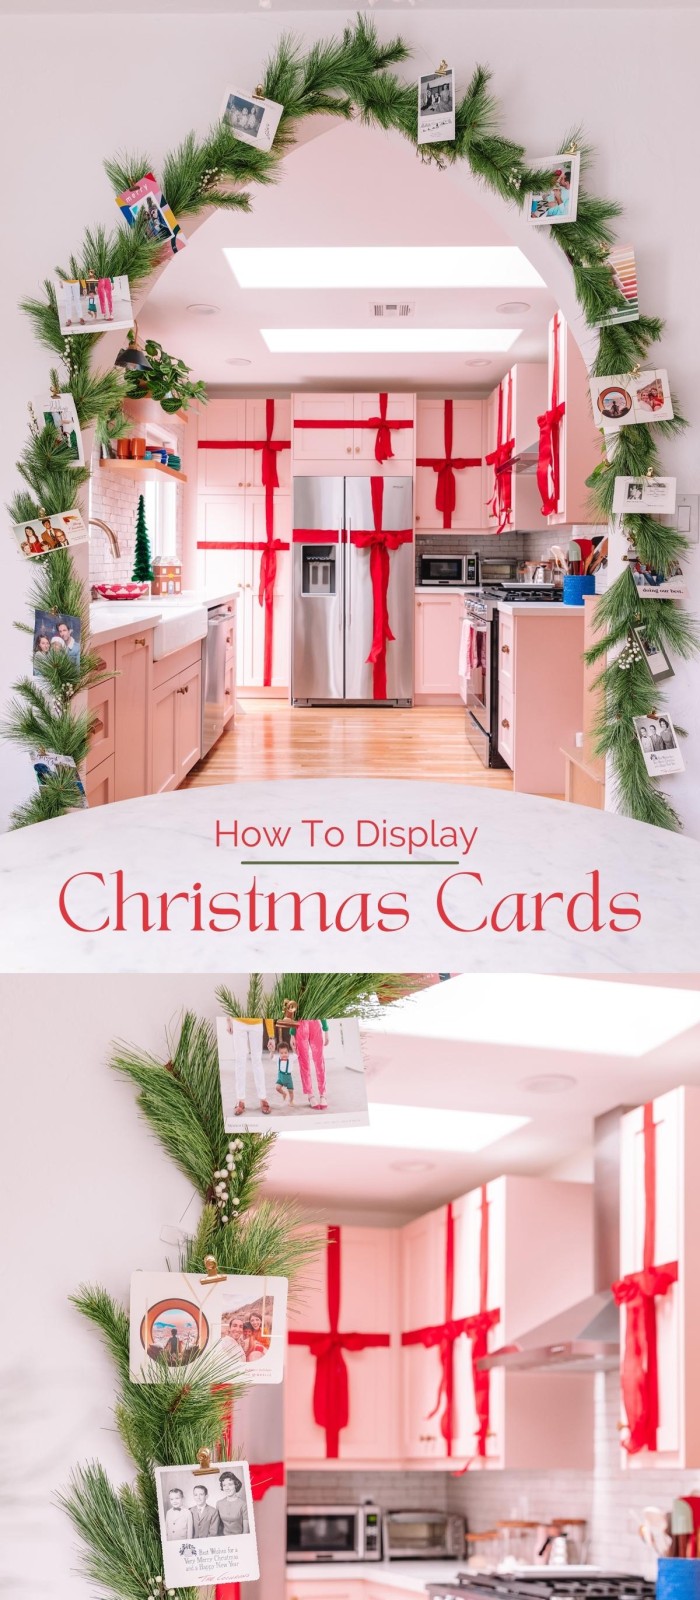 Christmas cards on garland with text "how to display christmas cards"